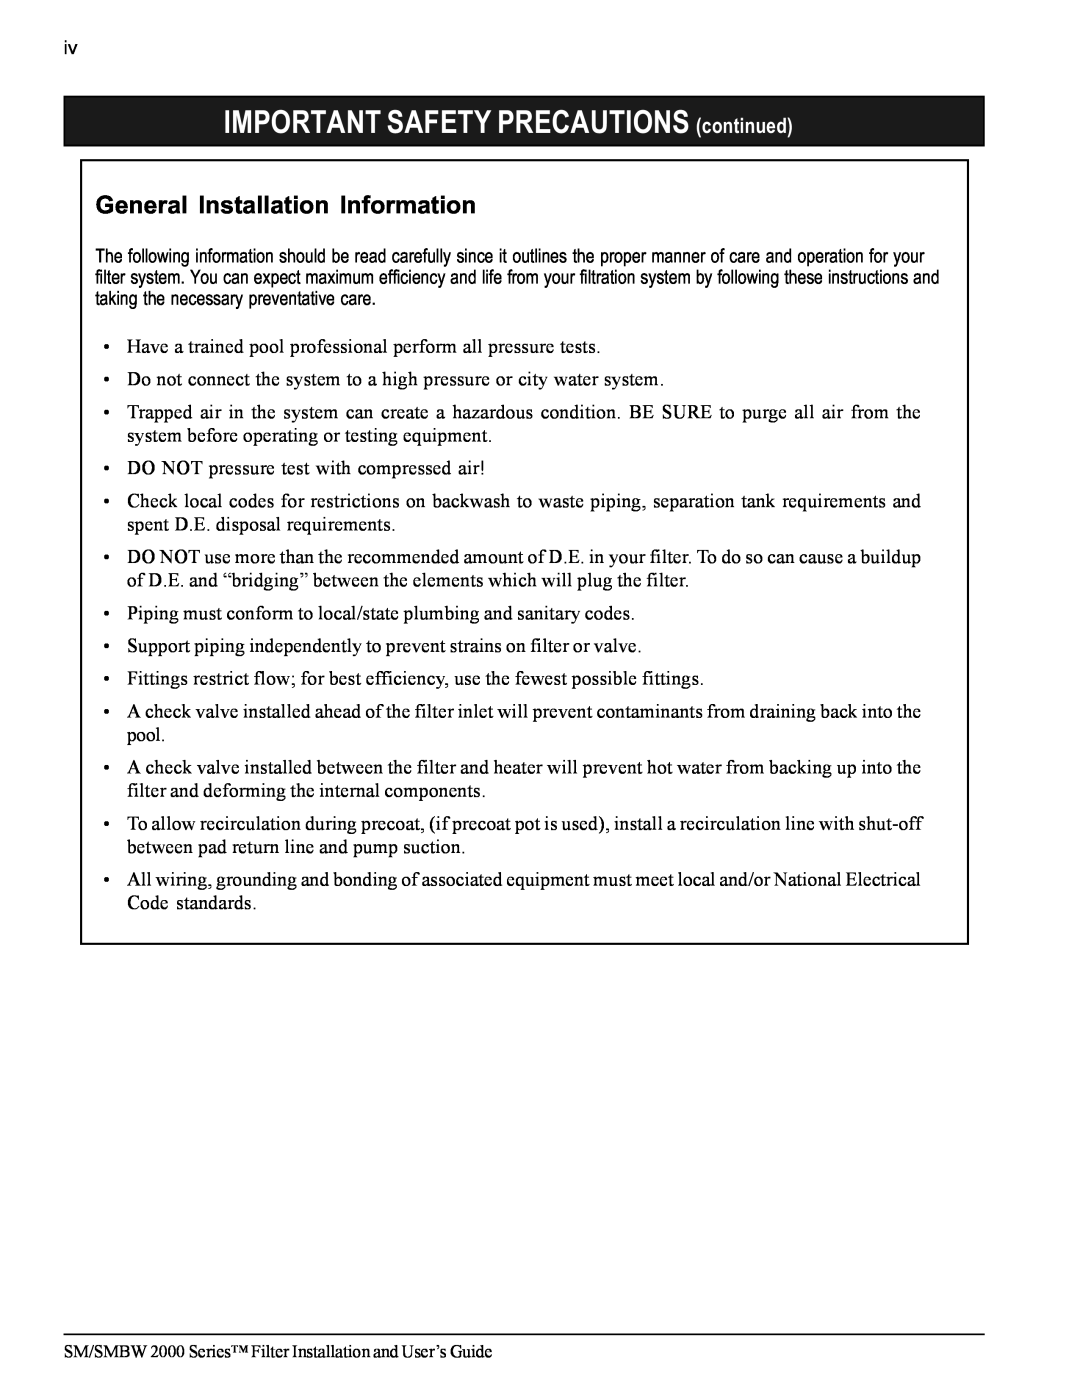 Pentair SM/SMBW 2000 important safety instructions General Installation Information, IMPORTANT SAFETY PRECAUTIONS continued 